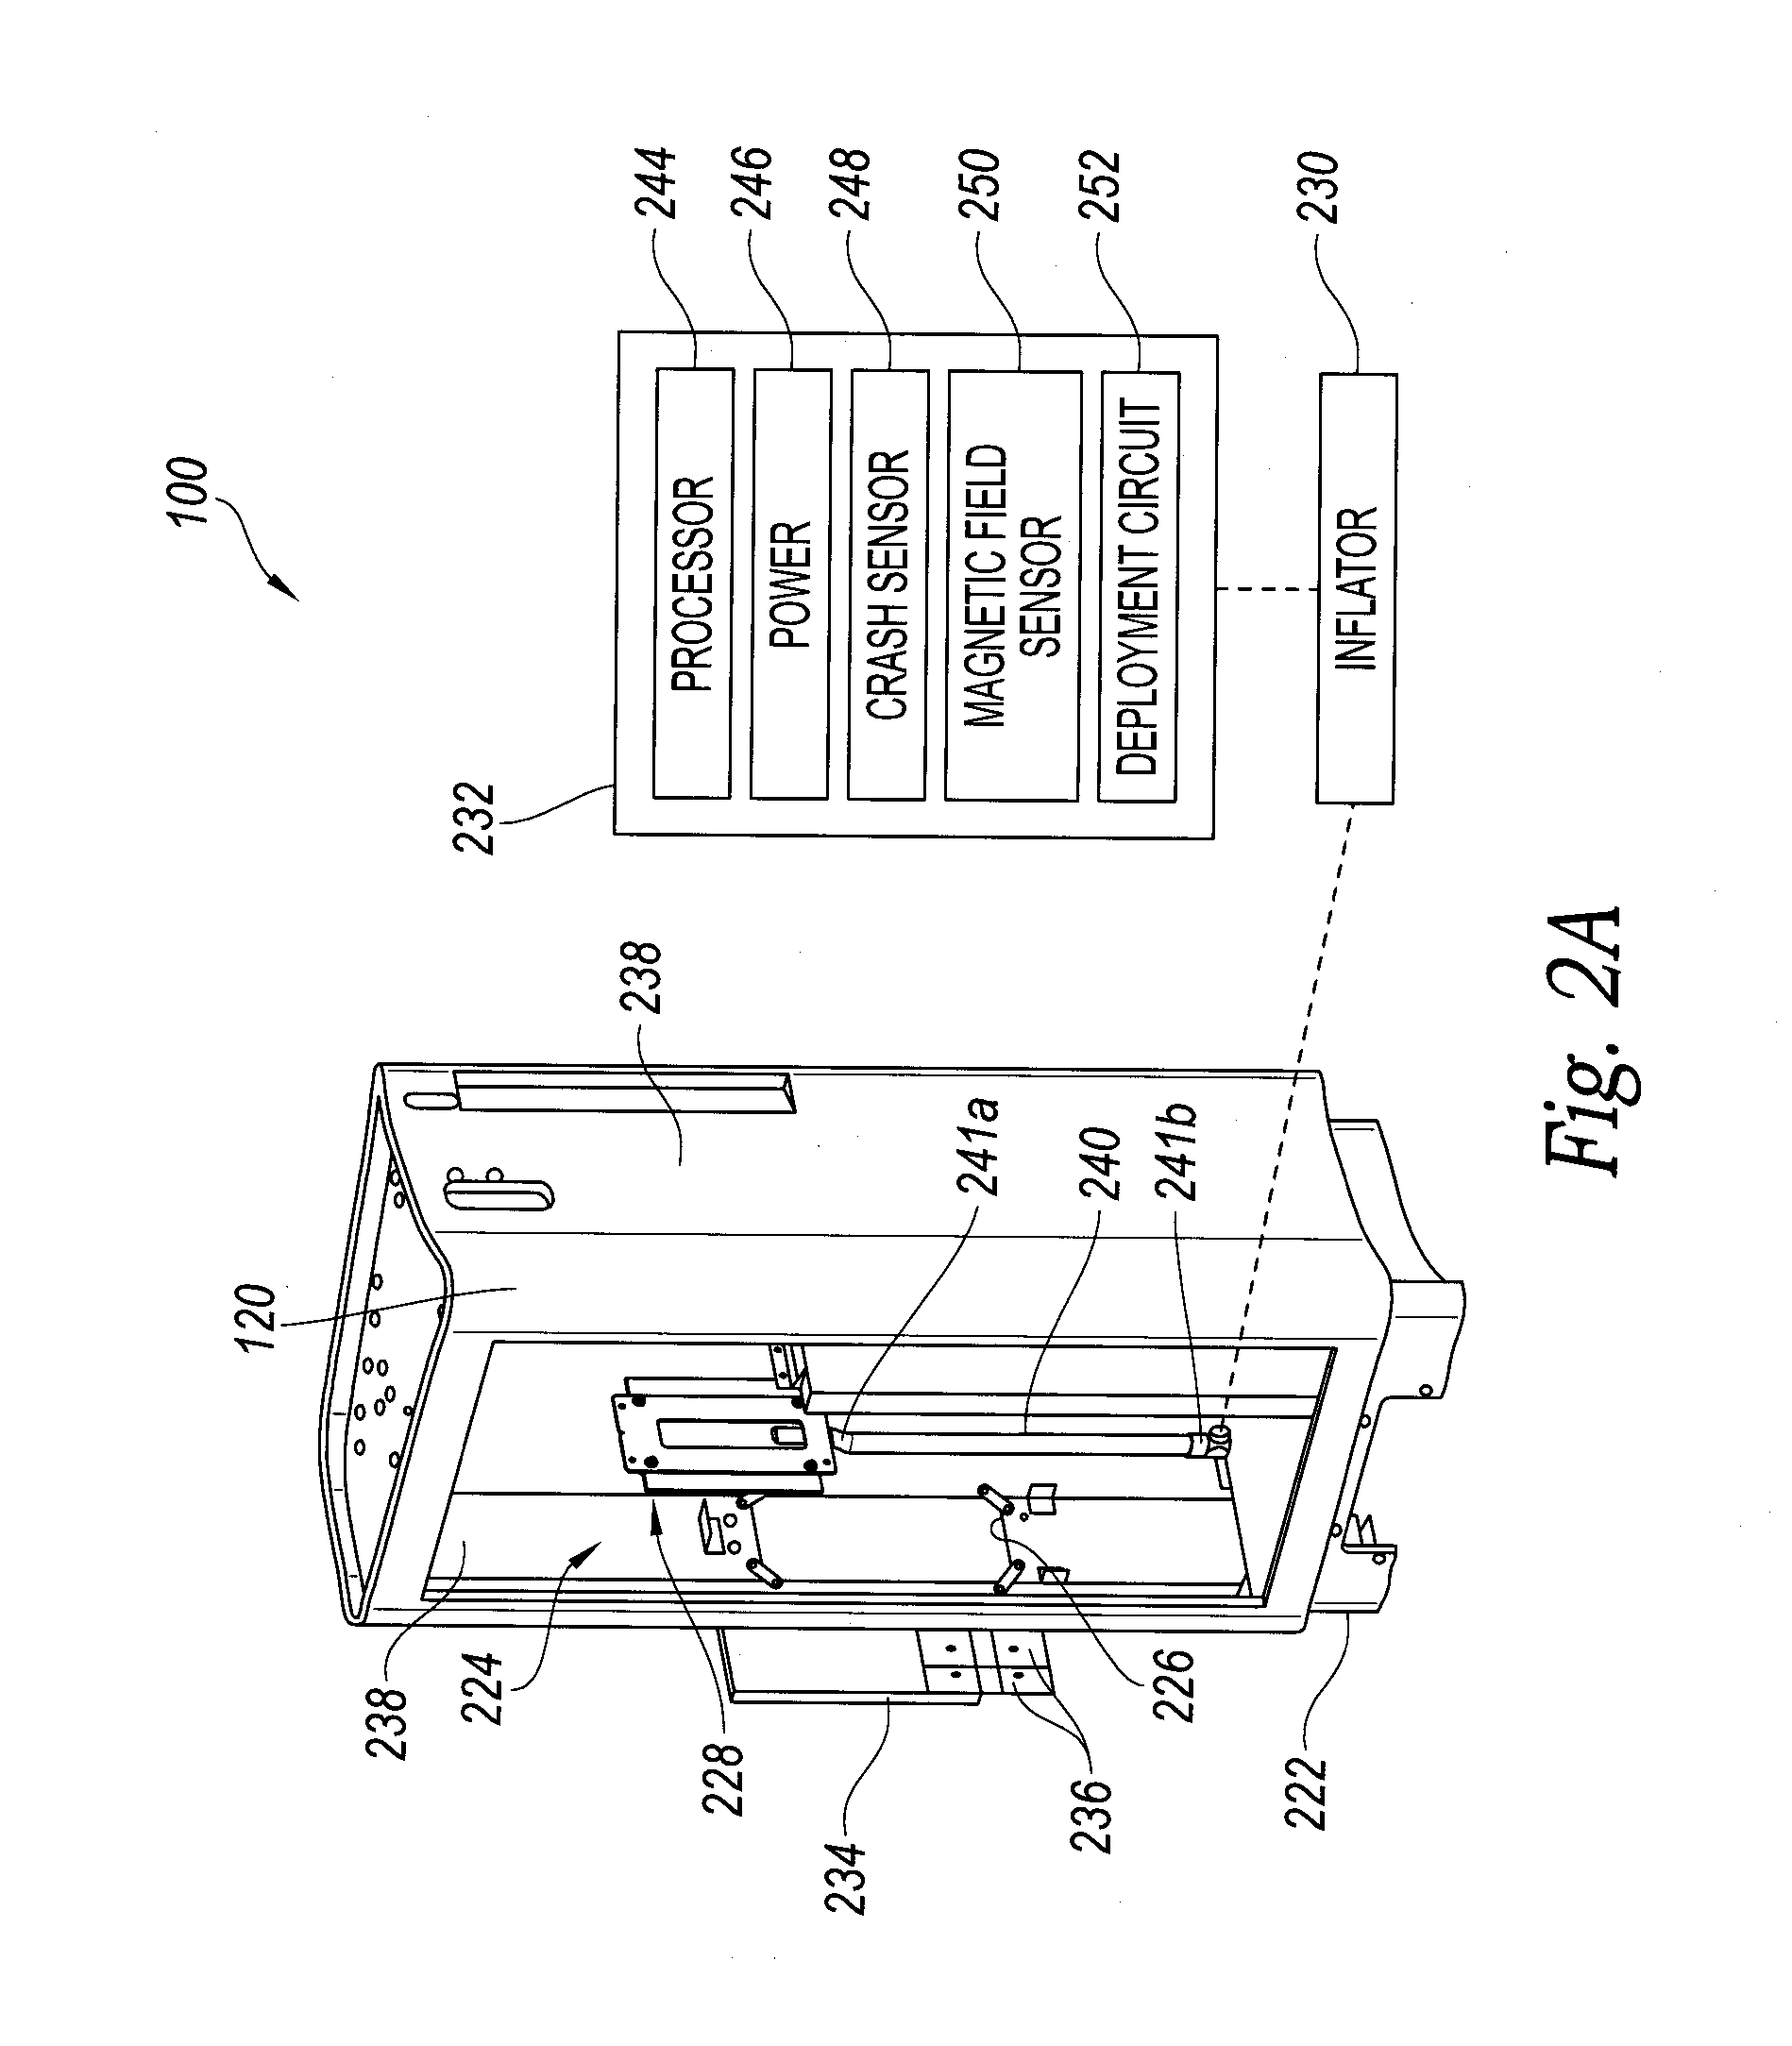 Structure mounted airbag assemblies and associated systems and methods